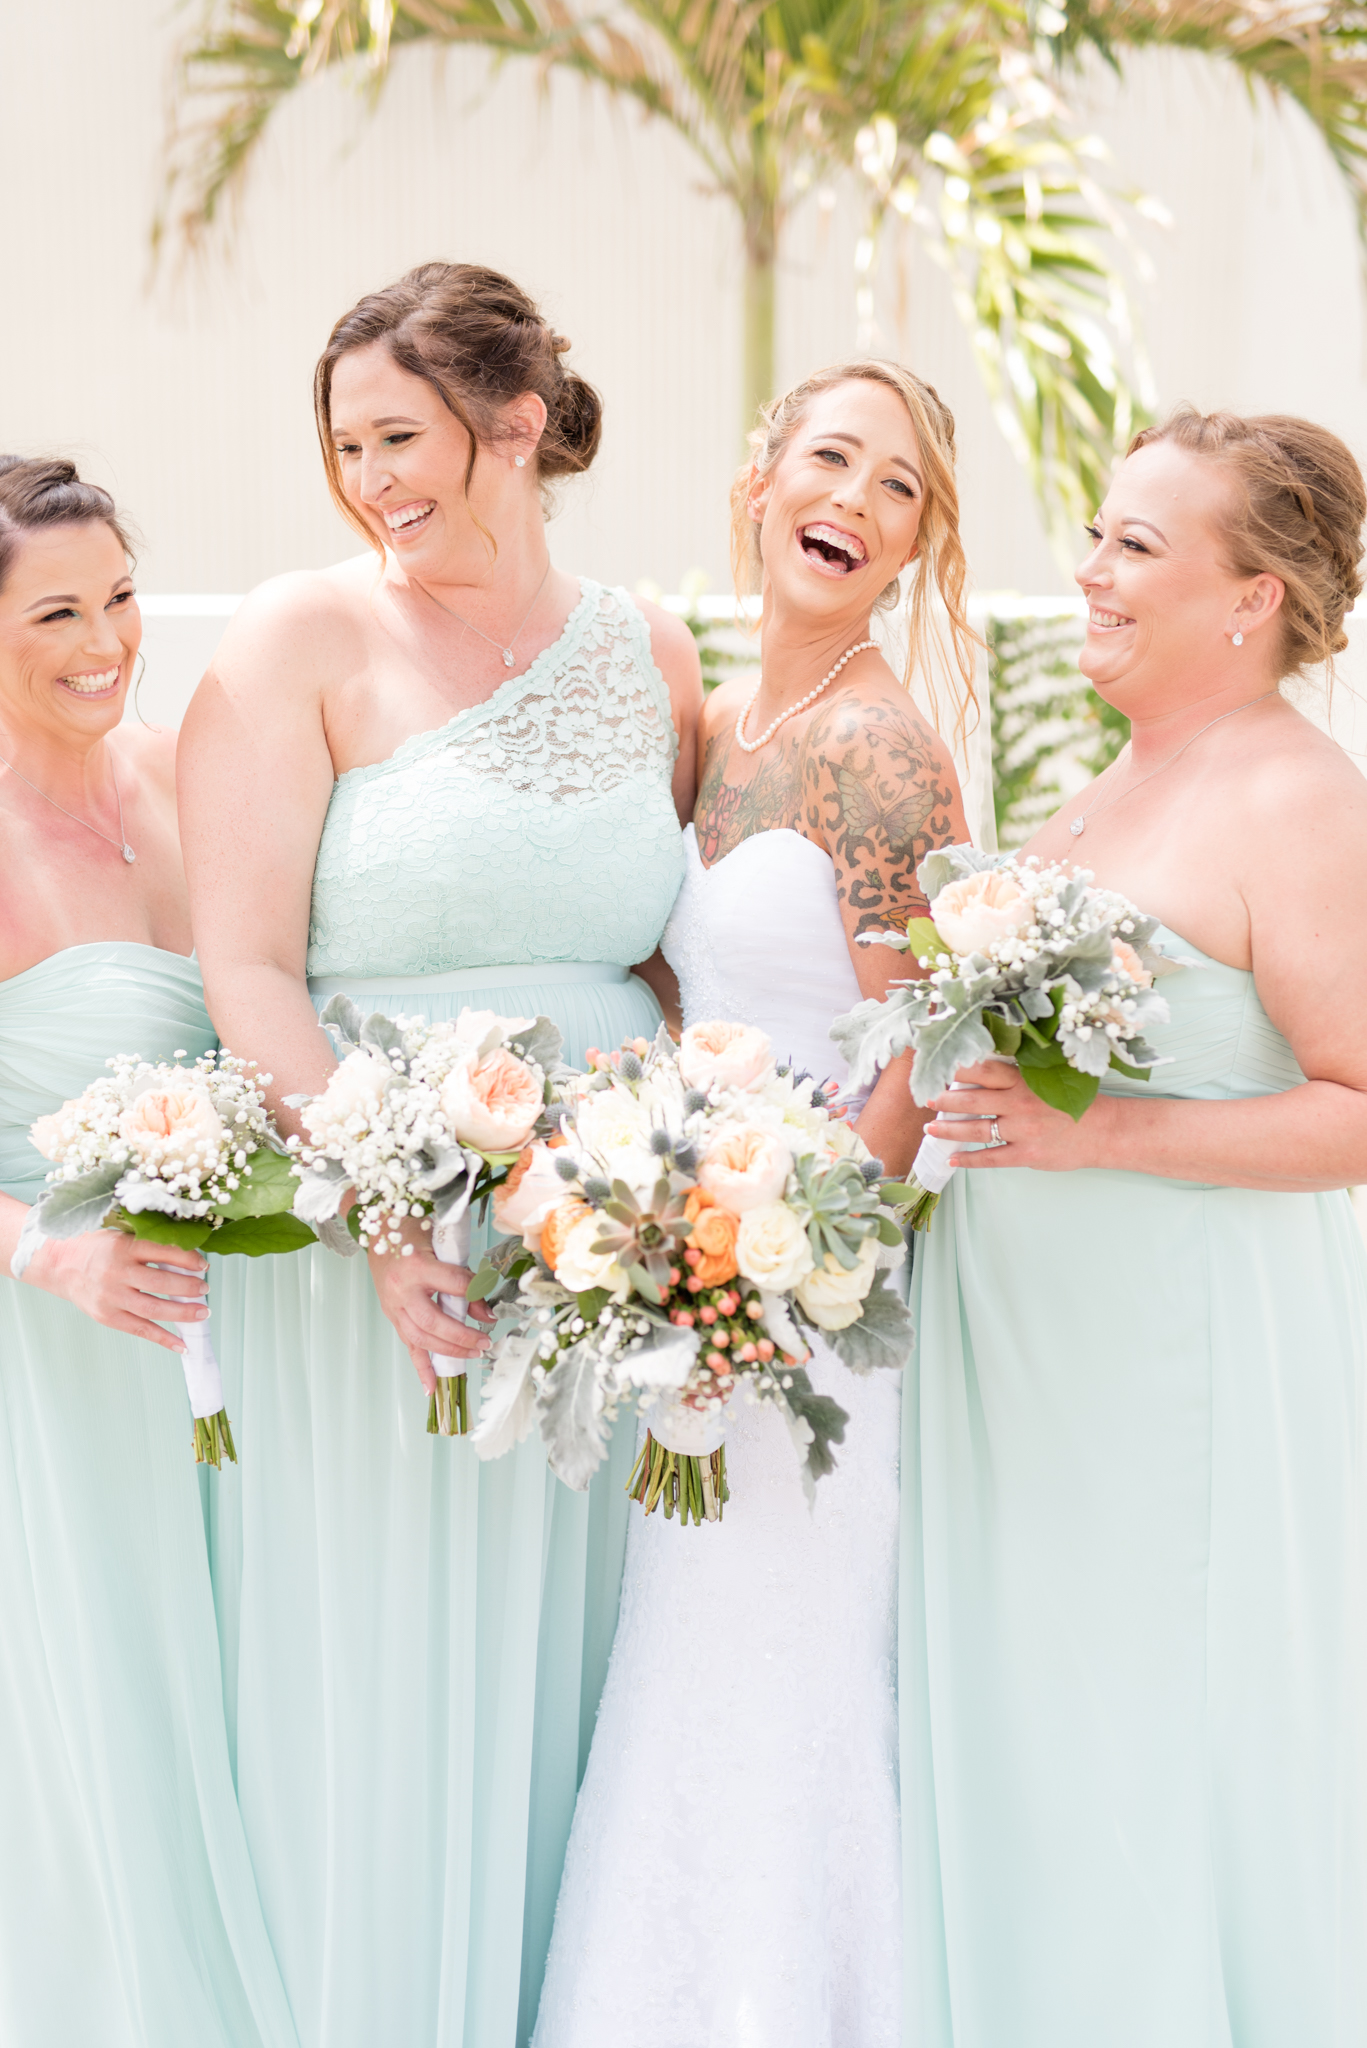 Brde laughs while standing with bridesmaids.